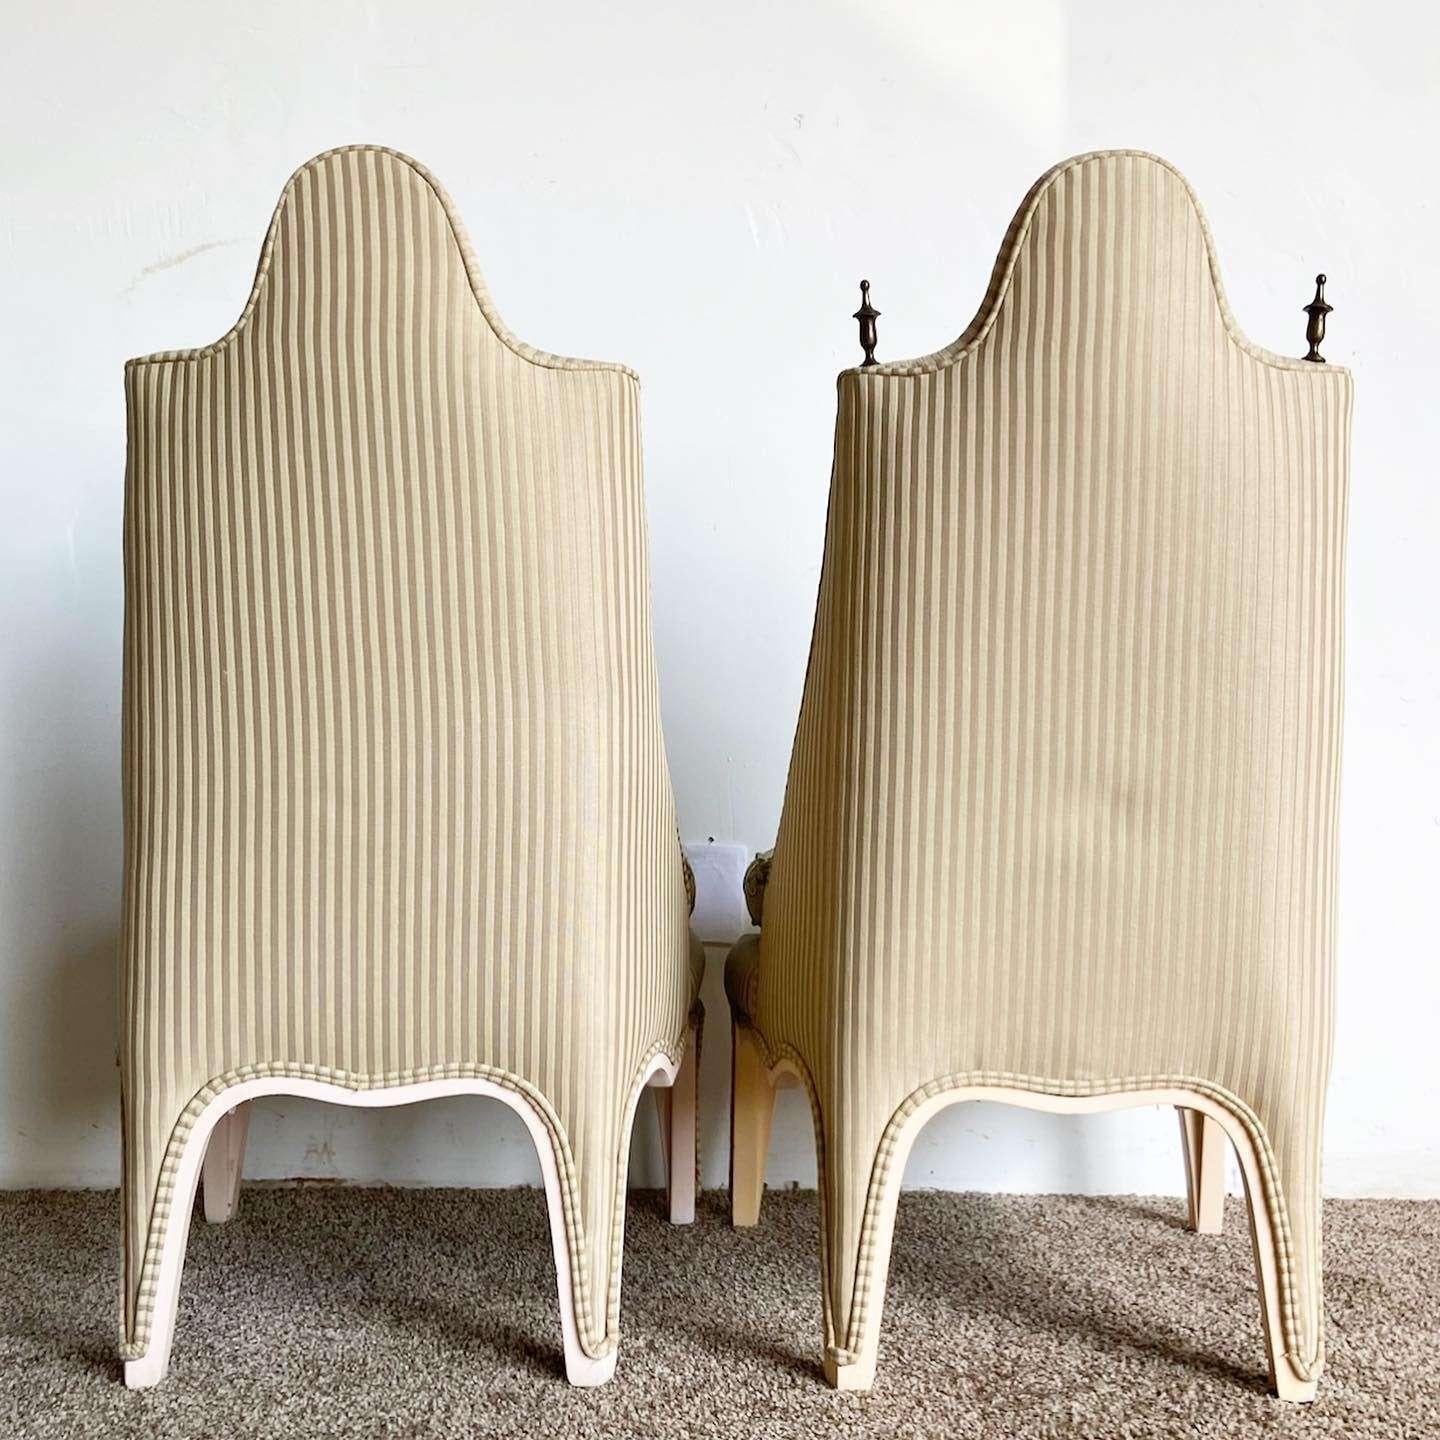 Mid-20th Century Regency Green and Tan Accent Chairs - a Pair For Sale